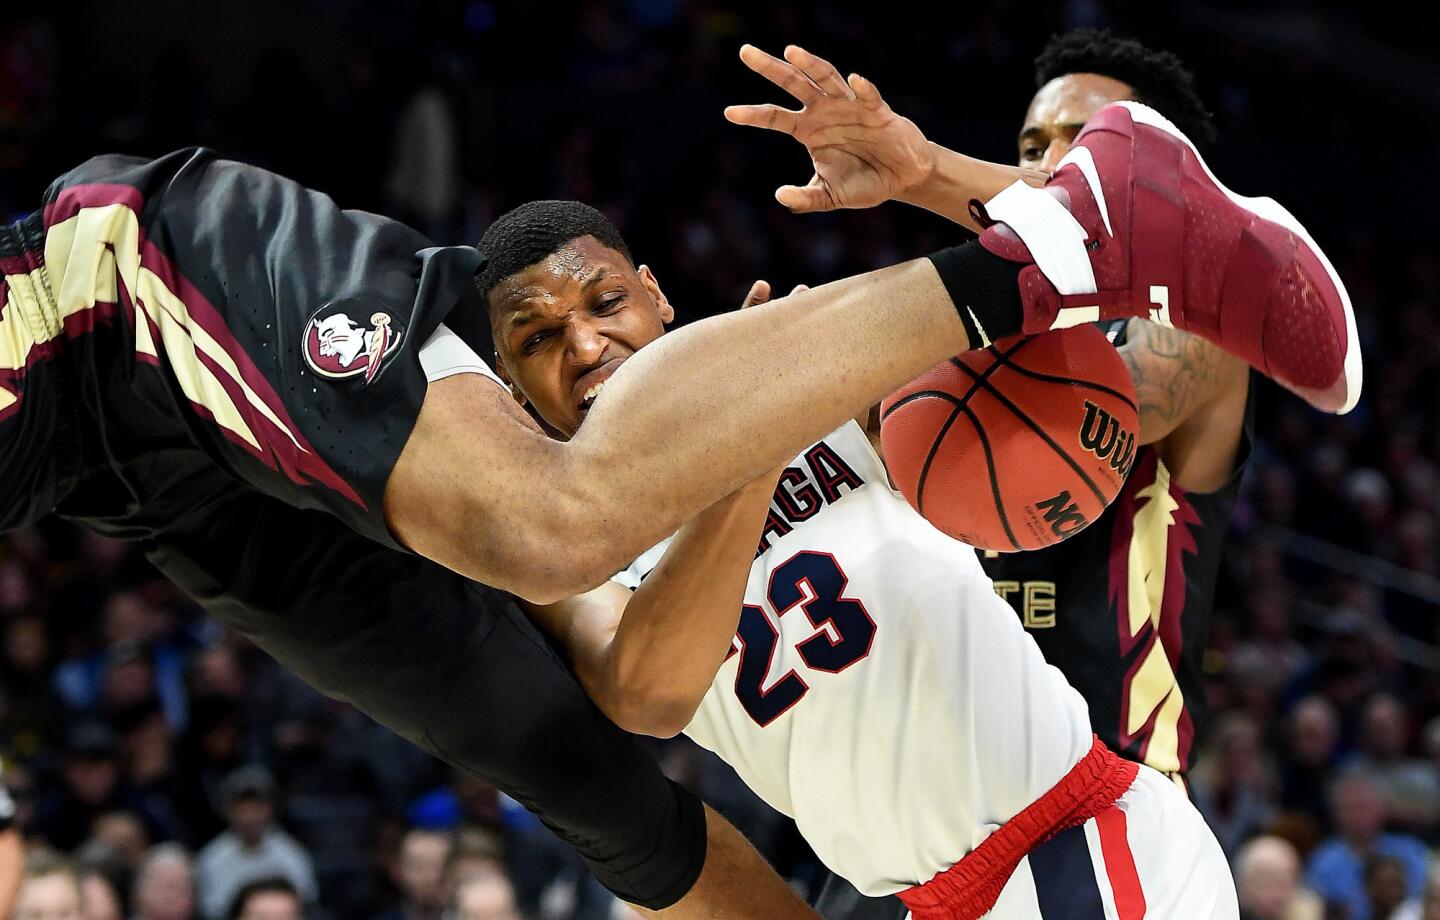 Gonzaga's Zach Norvell is fouled by Florida St.'s Ike Obiagu while attempting a shot in the 1st half in 3rd round of the NCAA Tournament at the Staples Center Thursday.